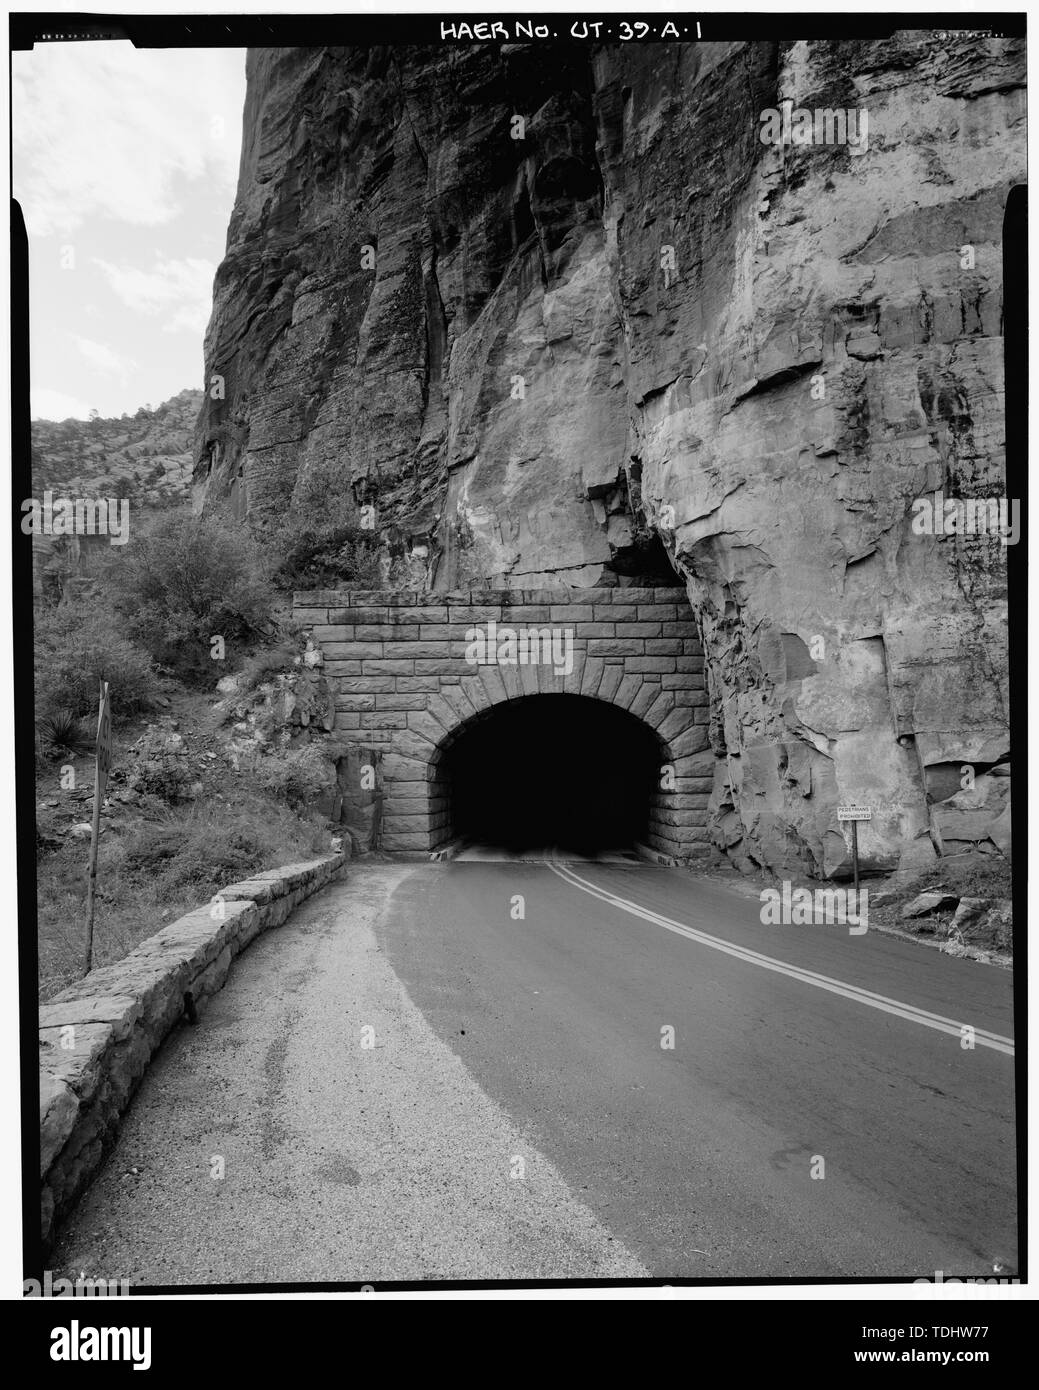 OVERALL VIEW OF WEST PORTAL AND GUARDRAIL, LOOKING SOUTHEAST - Zion-Mount Carmel Highway, Tunnel, Two miles east of Zion Canyon Scenic Drive, Springdale, Washington County, UT; Nevada Construction Company; Bureau of Public Roads; Finch, J B; Mitchell, R R; Campbell, K B; Jones, T A; Scott, R N; Gregory, Herbert E; Cement Gun Construction Company; US Geologrical Service; US Bureau of Mining; Crane, W R; Reynolds-Ely Construction Co; Case Construction Company; Shea and Shea; Jurale, James, historian; Fraser, Clayton B, photographer; Anderson,  Michael, historian; Grogan, Brian C, photographer Stock Photo